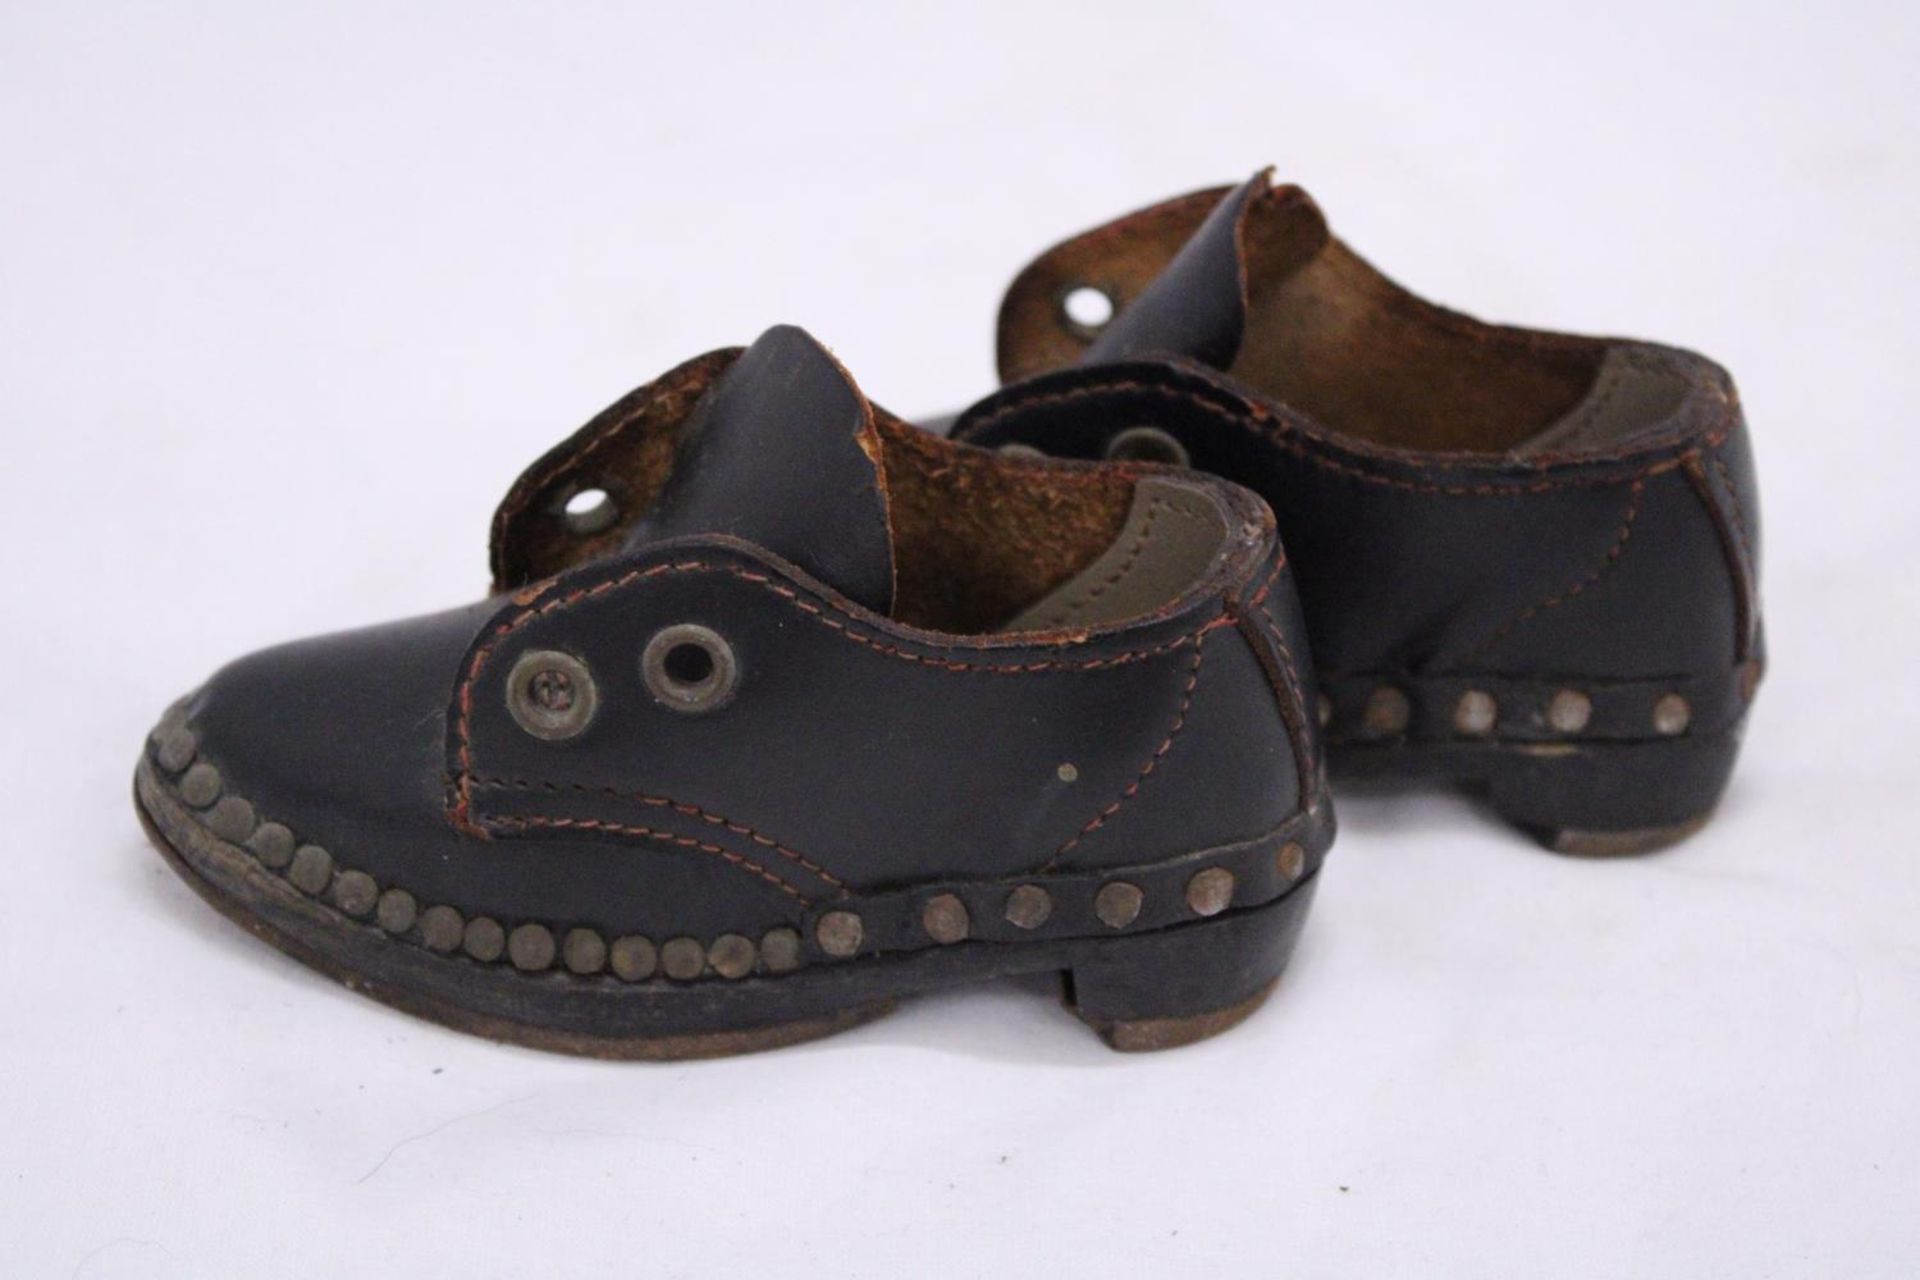 A PAIR OF VICTORIAN STYLE LEATHER (HANDMADE) CHILDREN'S SHOES - Image 4 of 5